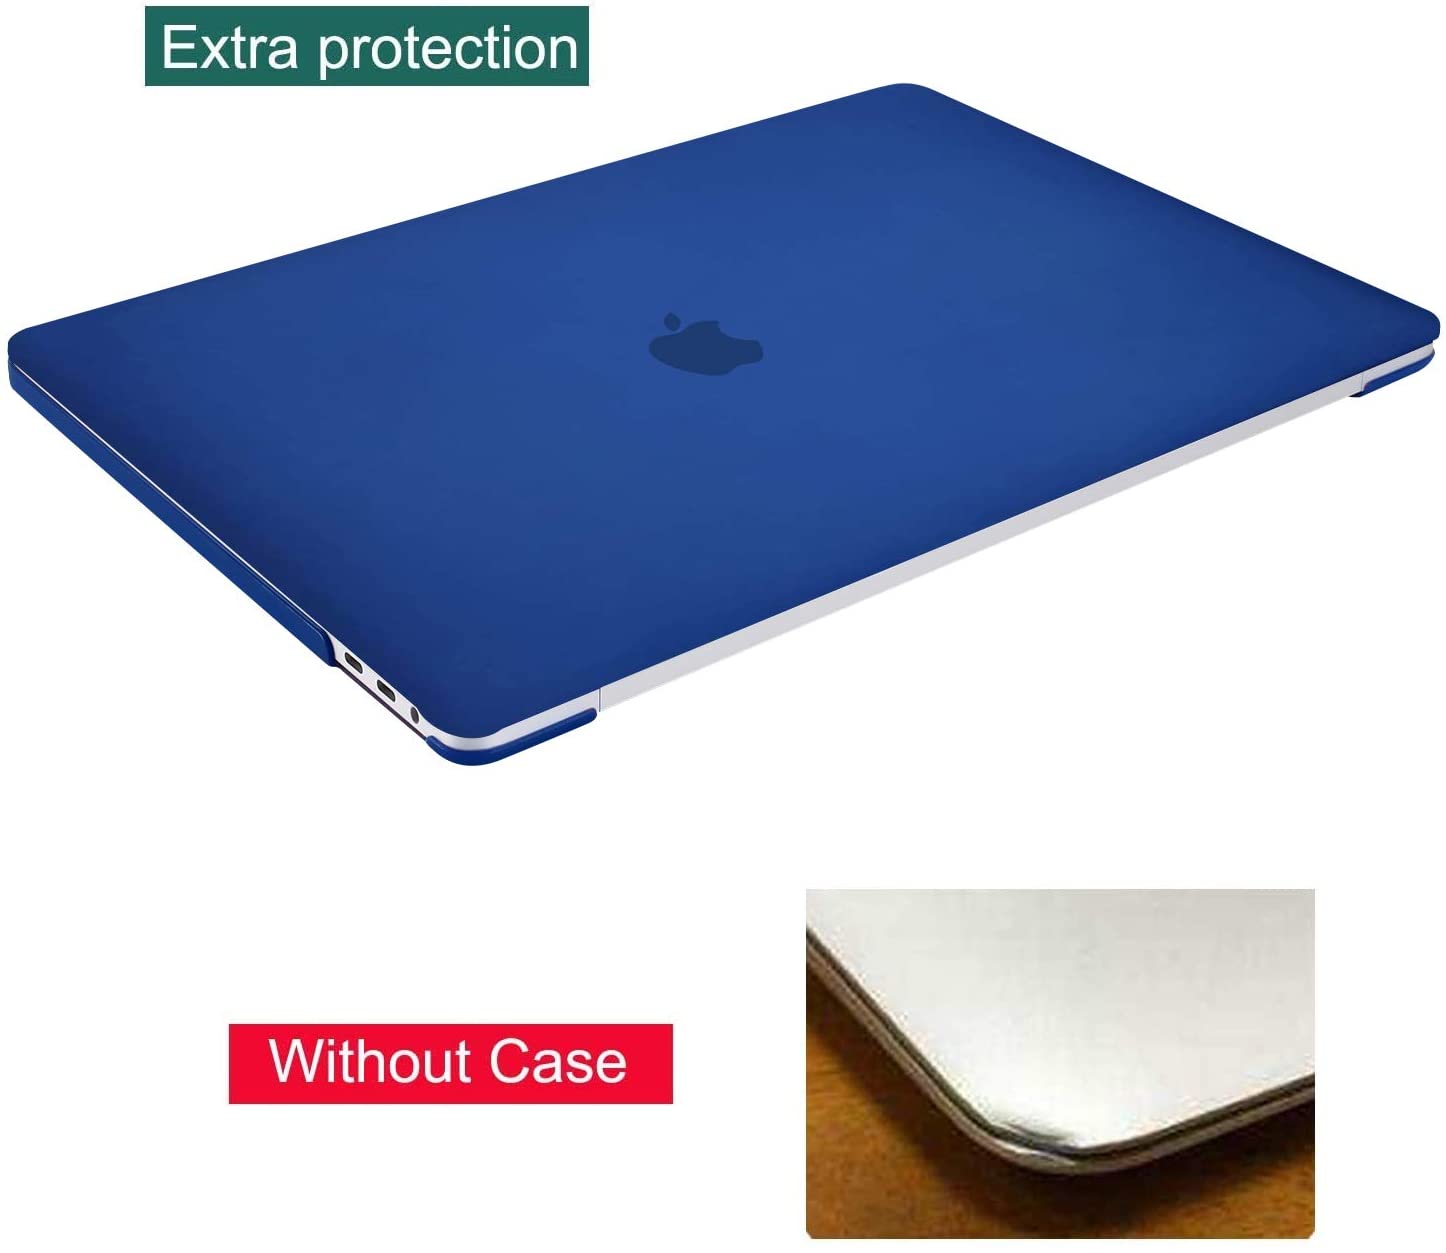 Navy Blue -  MacBook Pro 15 inch 2012-2015 & 16 inch  2019 - 2020 . Hard case, keyboard and screen protector. - e4cents